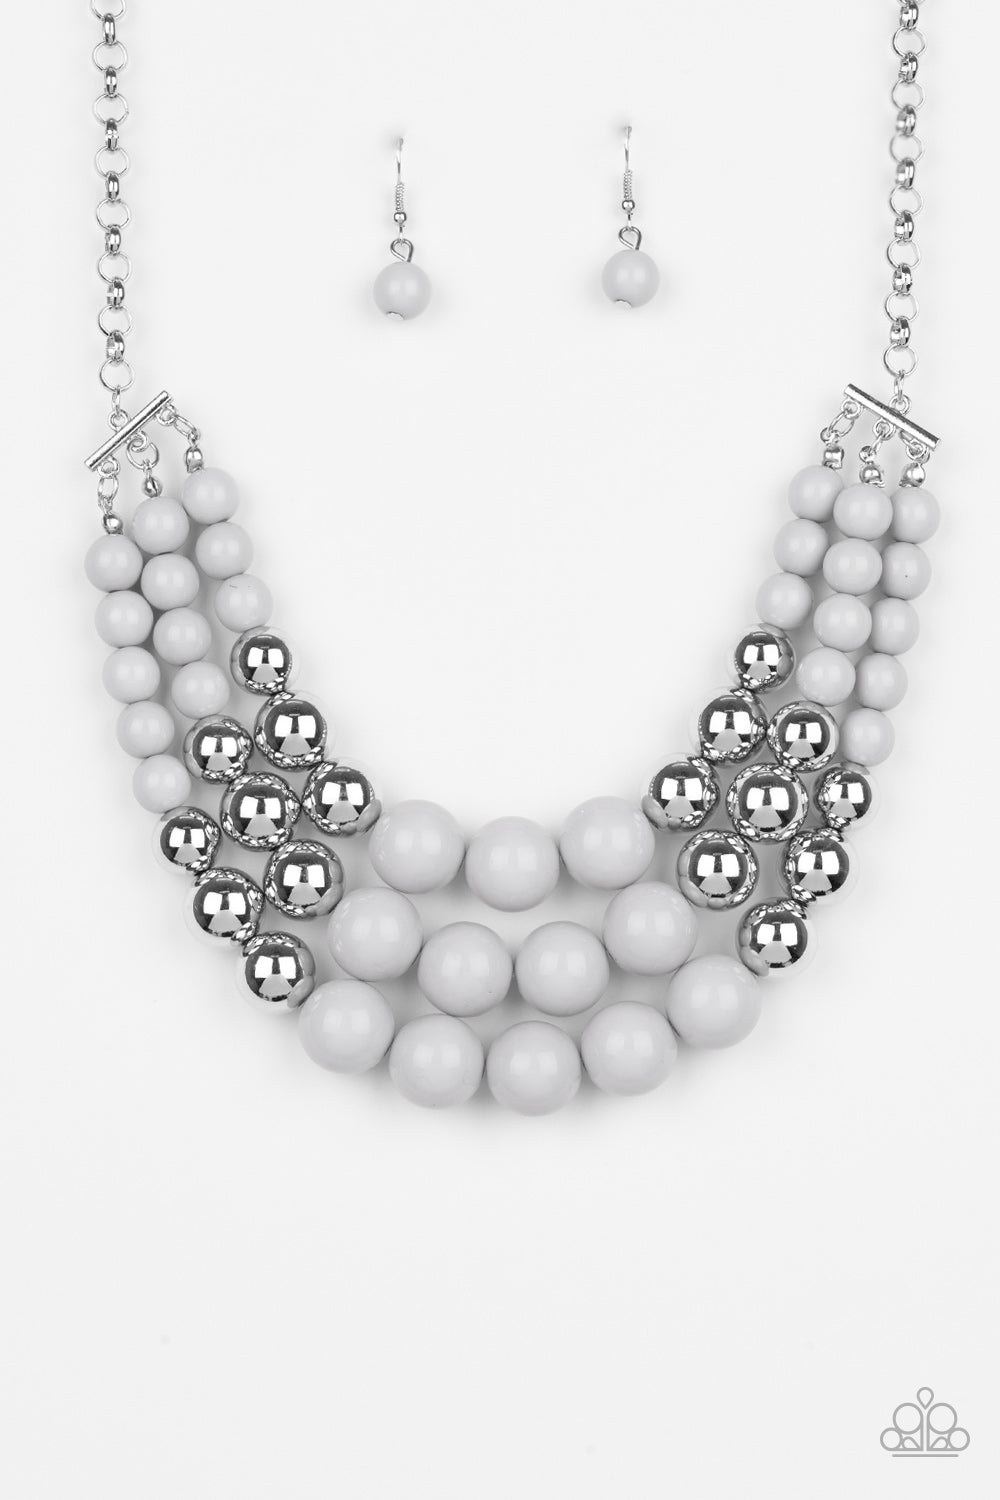 Dream Pop Paparazzi Accessories Necklace with Earrings